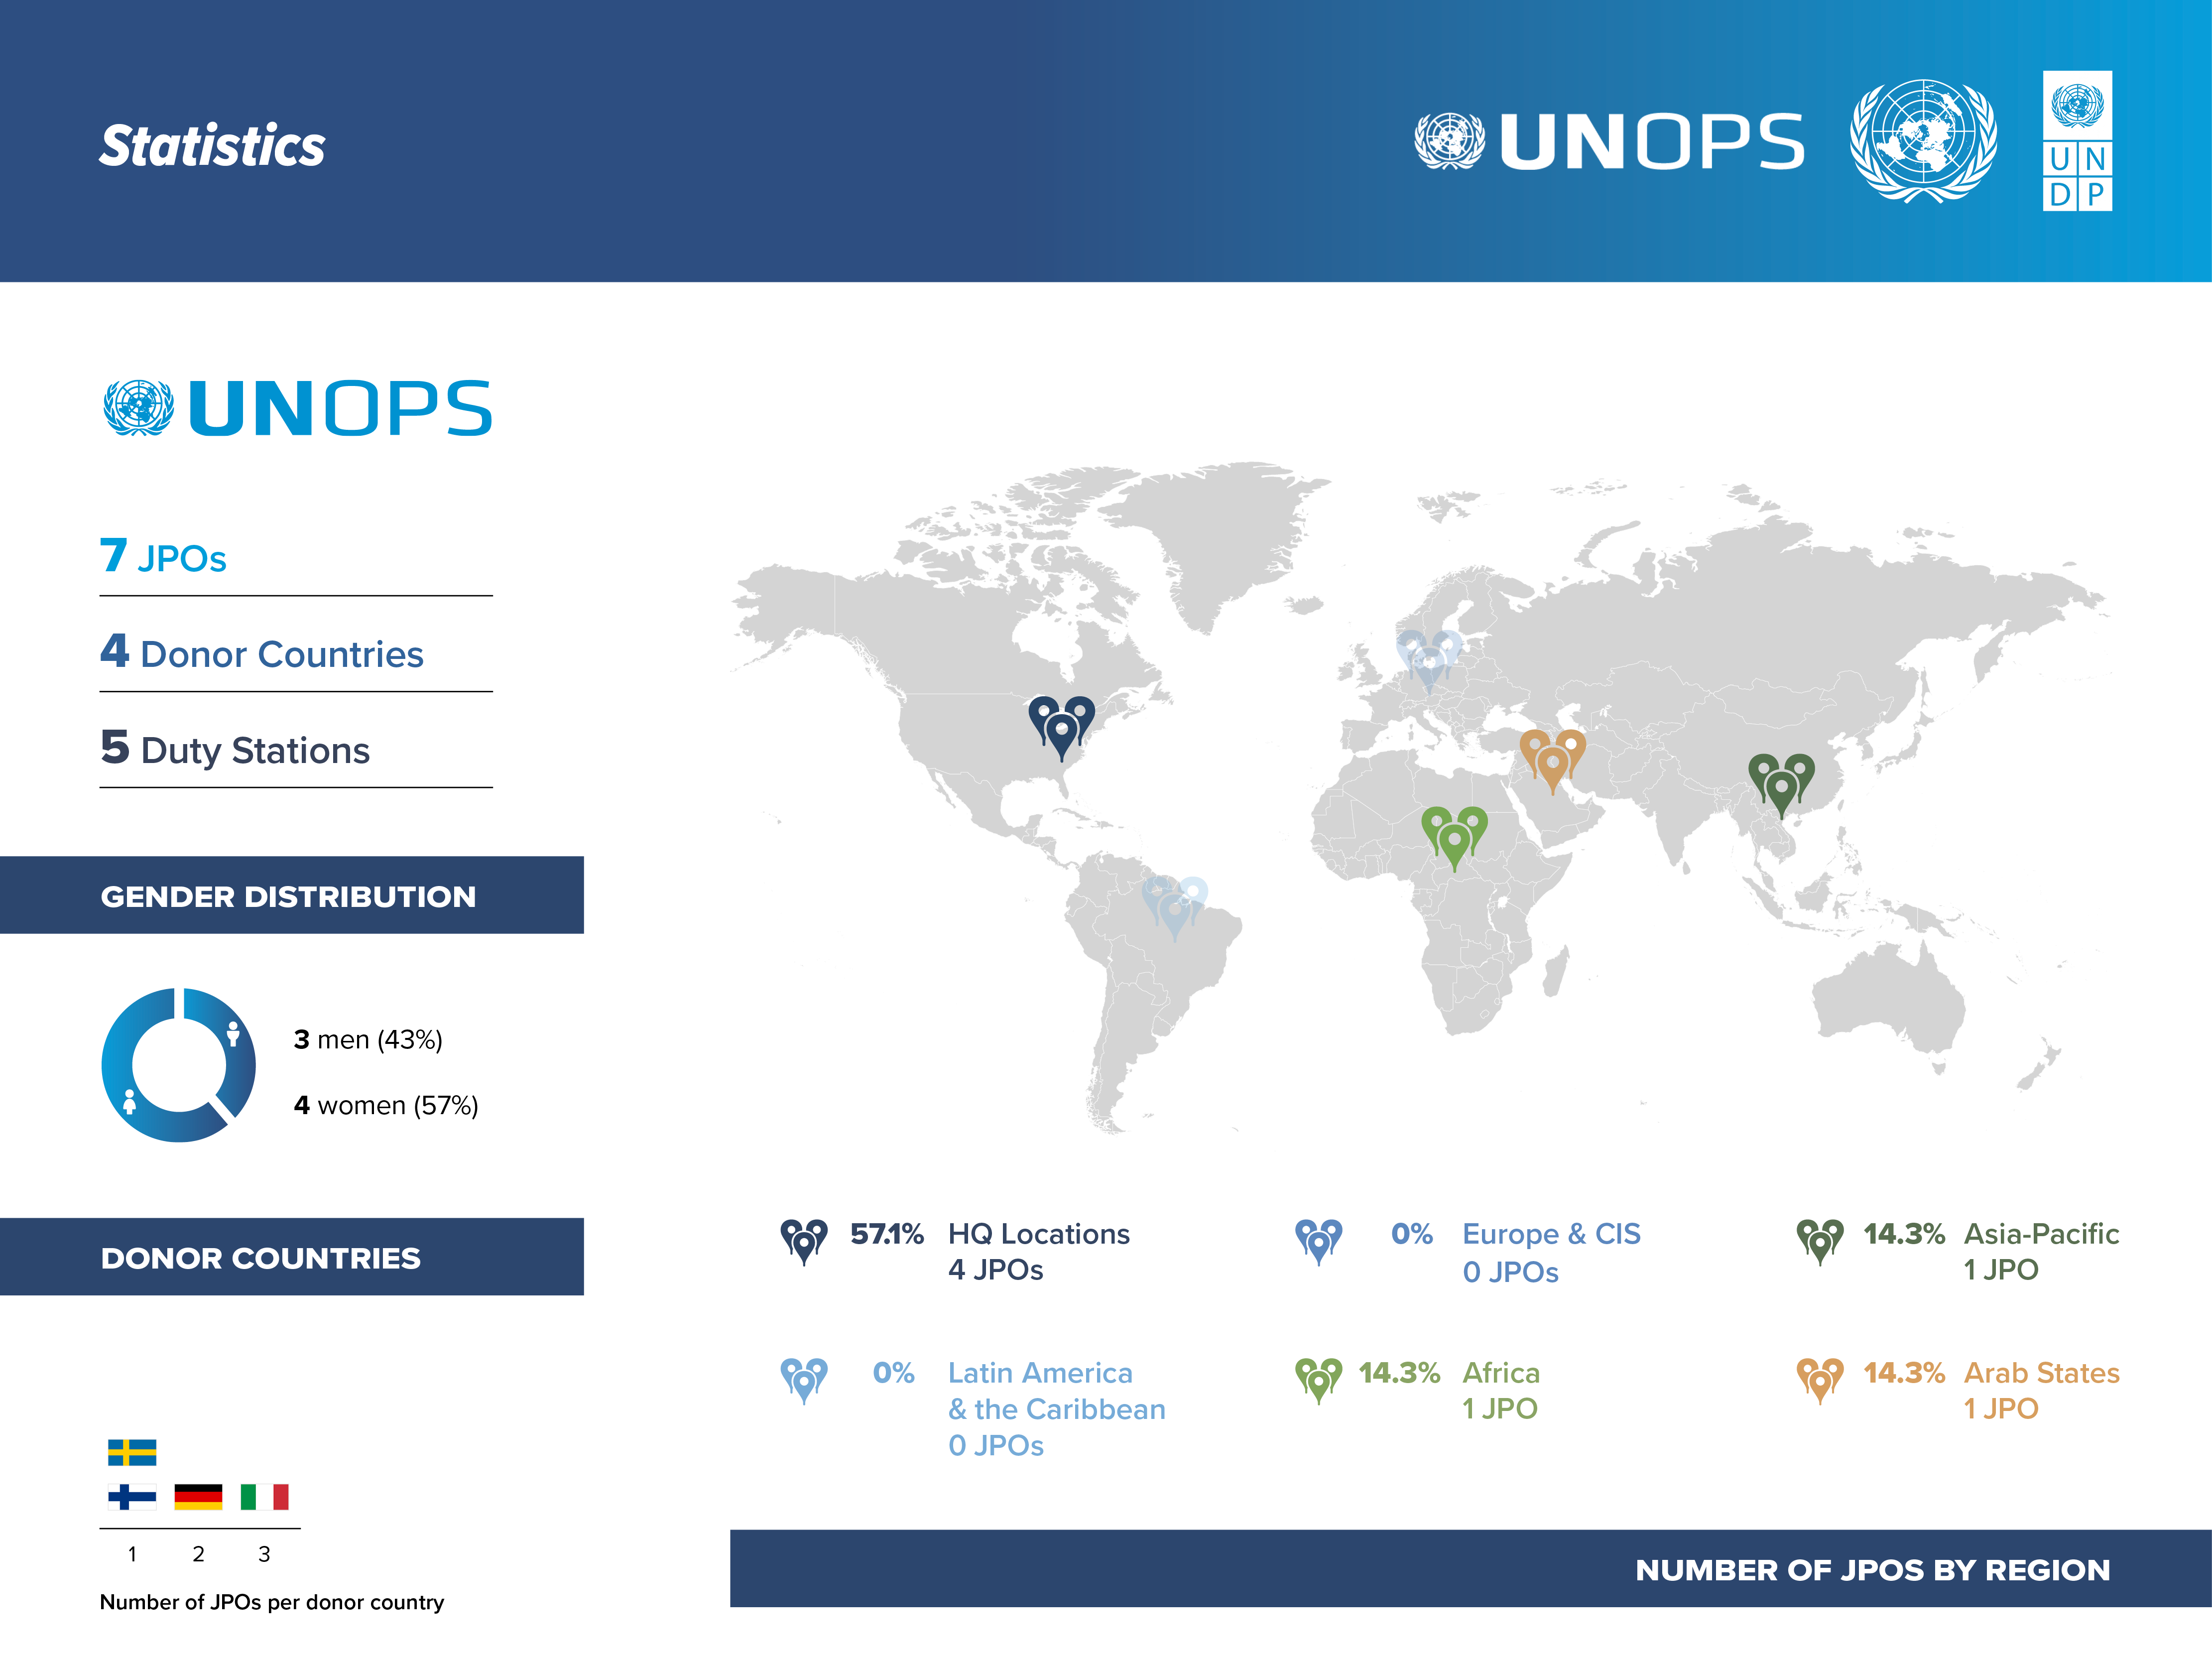 This image shows data about the JPO program in UNOPS agency. UNOPS has a total of 7 JPOs, from 4 Donor Countries, located in 5 Duty Stations.   The JPOs are composed of 3 men and 4 women, which represent 43% and 57% of the total respectively.  The donor countries Finland, and Sweden sponsor 1 JPO each. The donor country Germany sponsors 2 JPOs. The donor country Italy sponsors 3 JPOs.